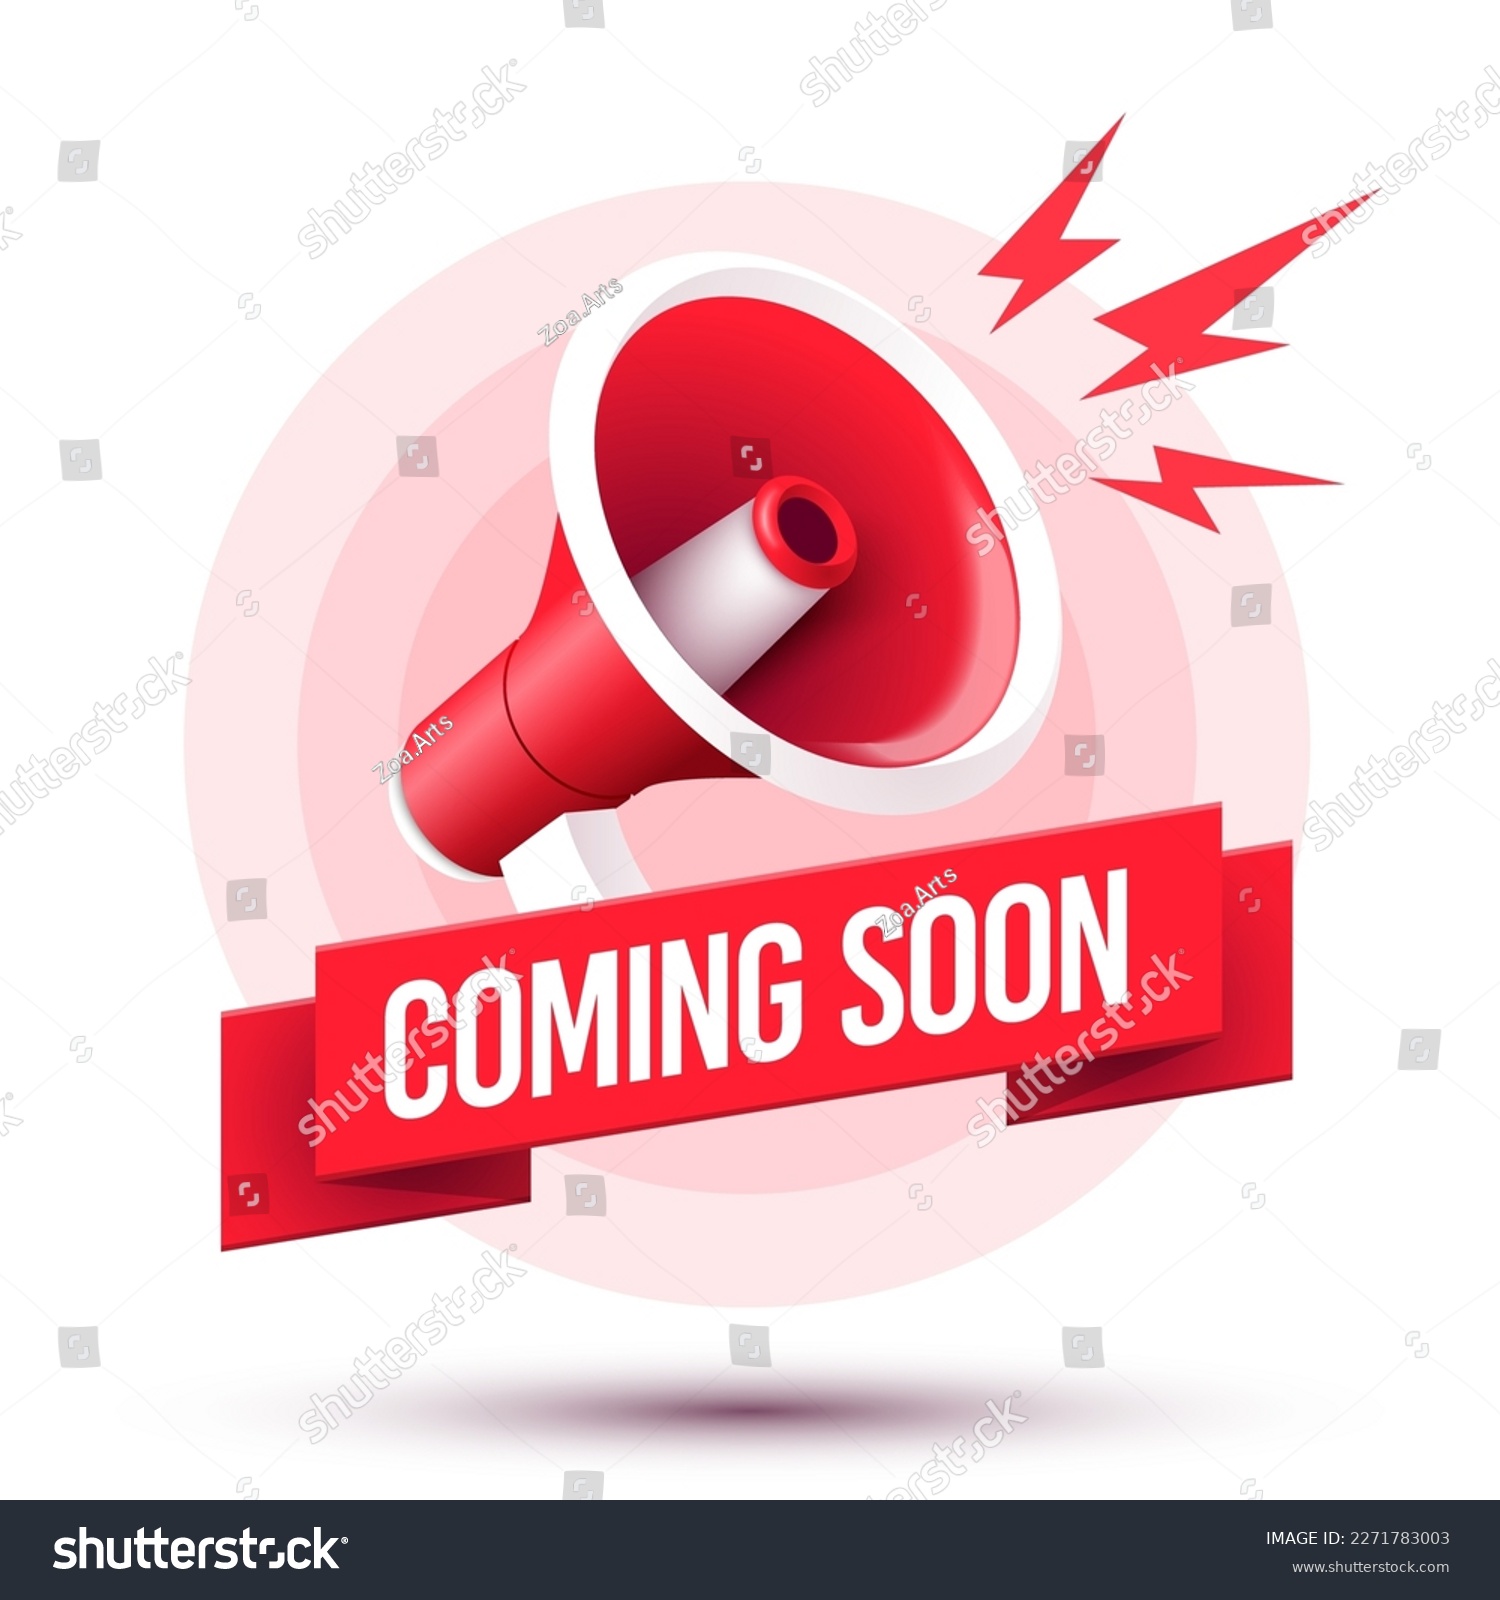 SVG of Megaphone Illustration And Banner With Text Coming Soon svg